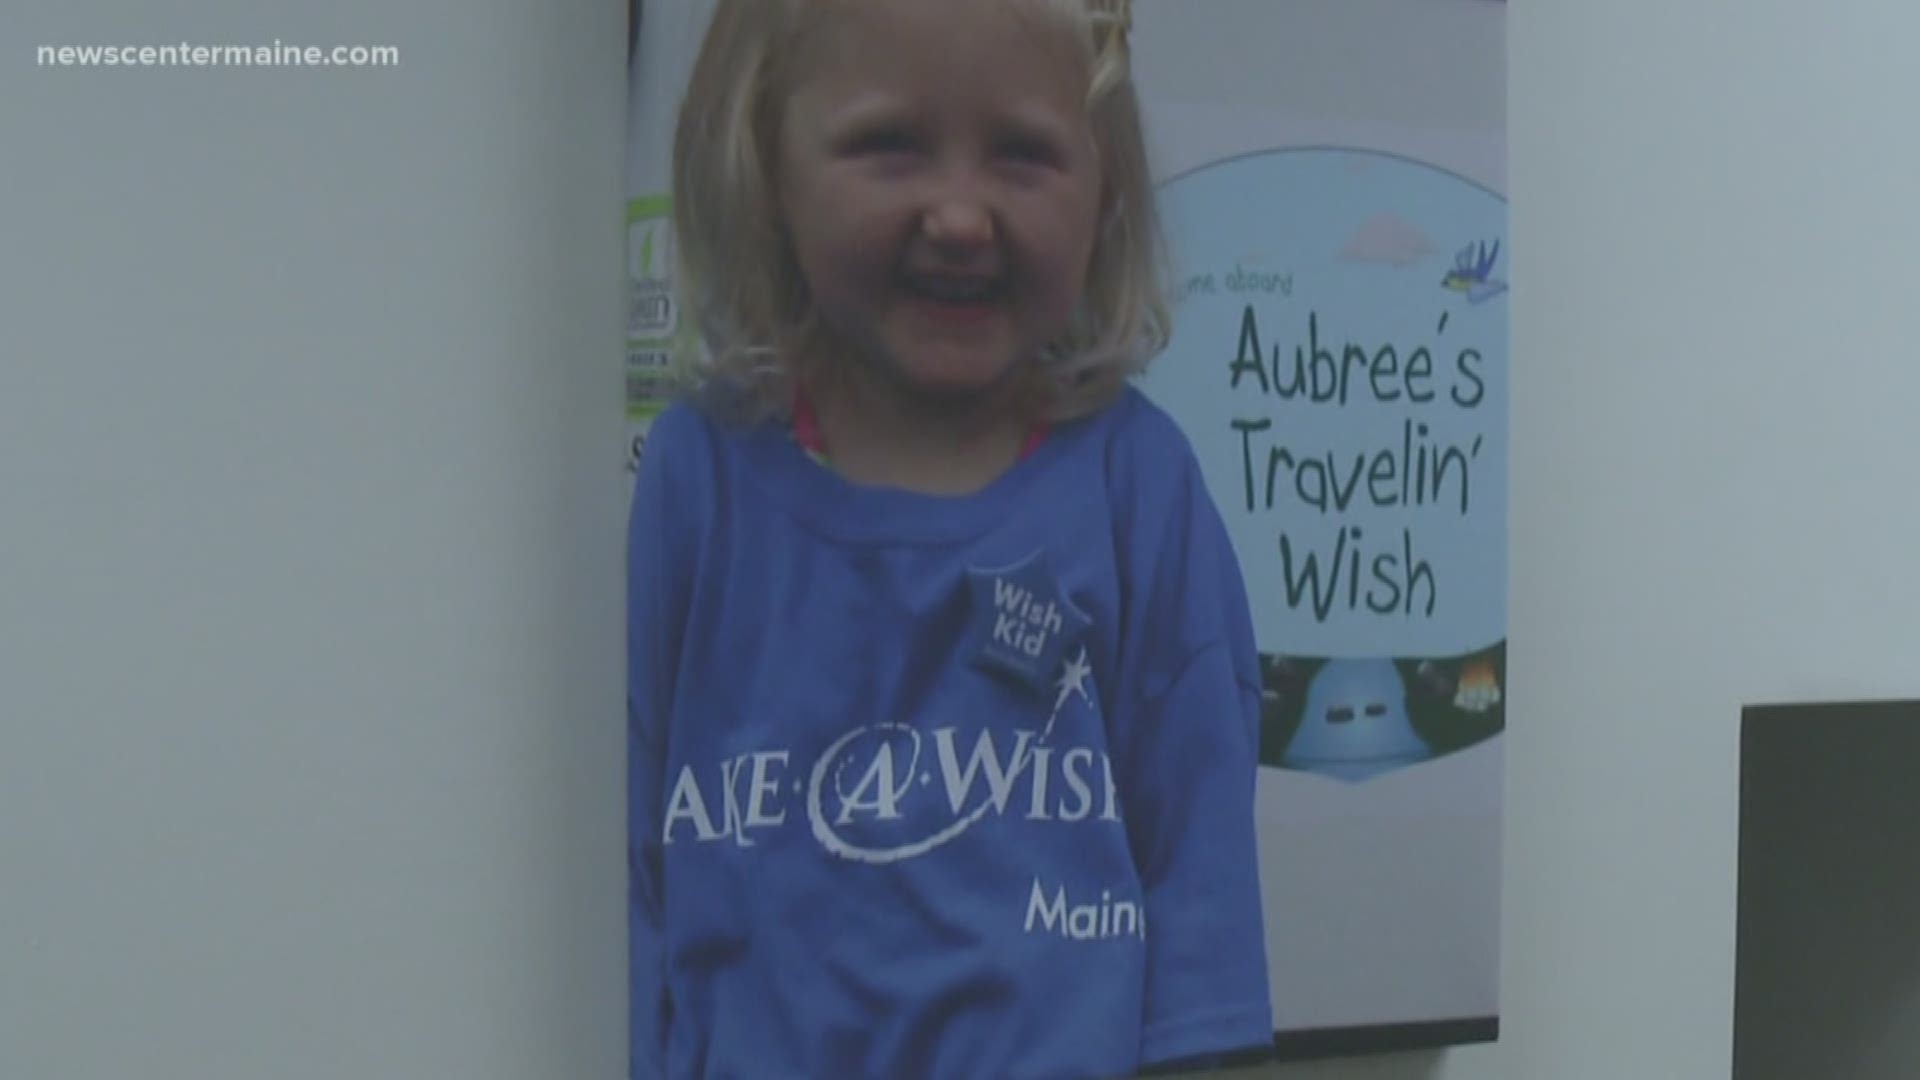 On May 16, the 20th annual Walk for Wishes will take place to help raise money for the Make-A-Wish Maine chapter.